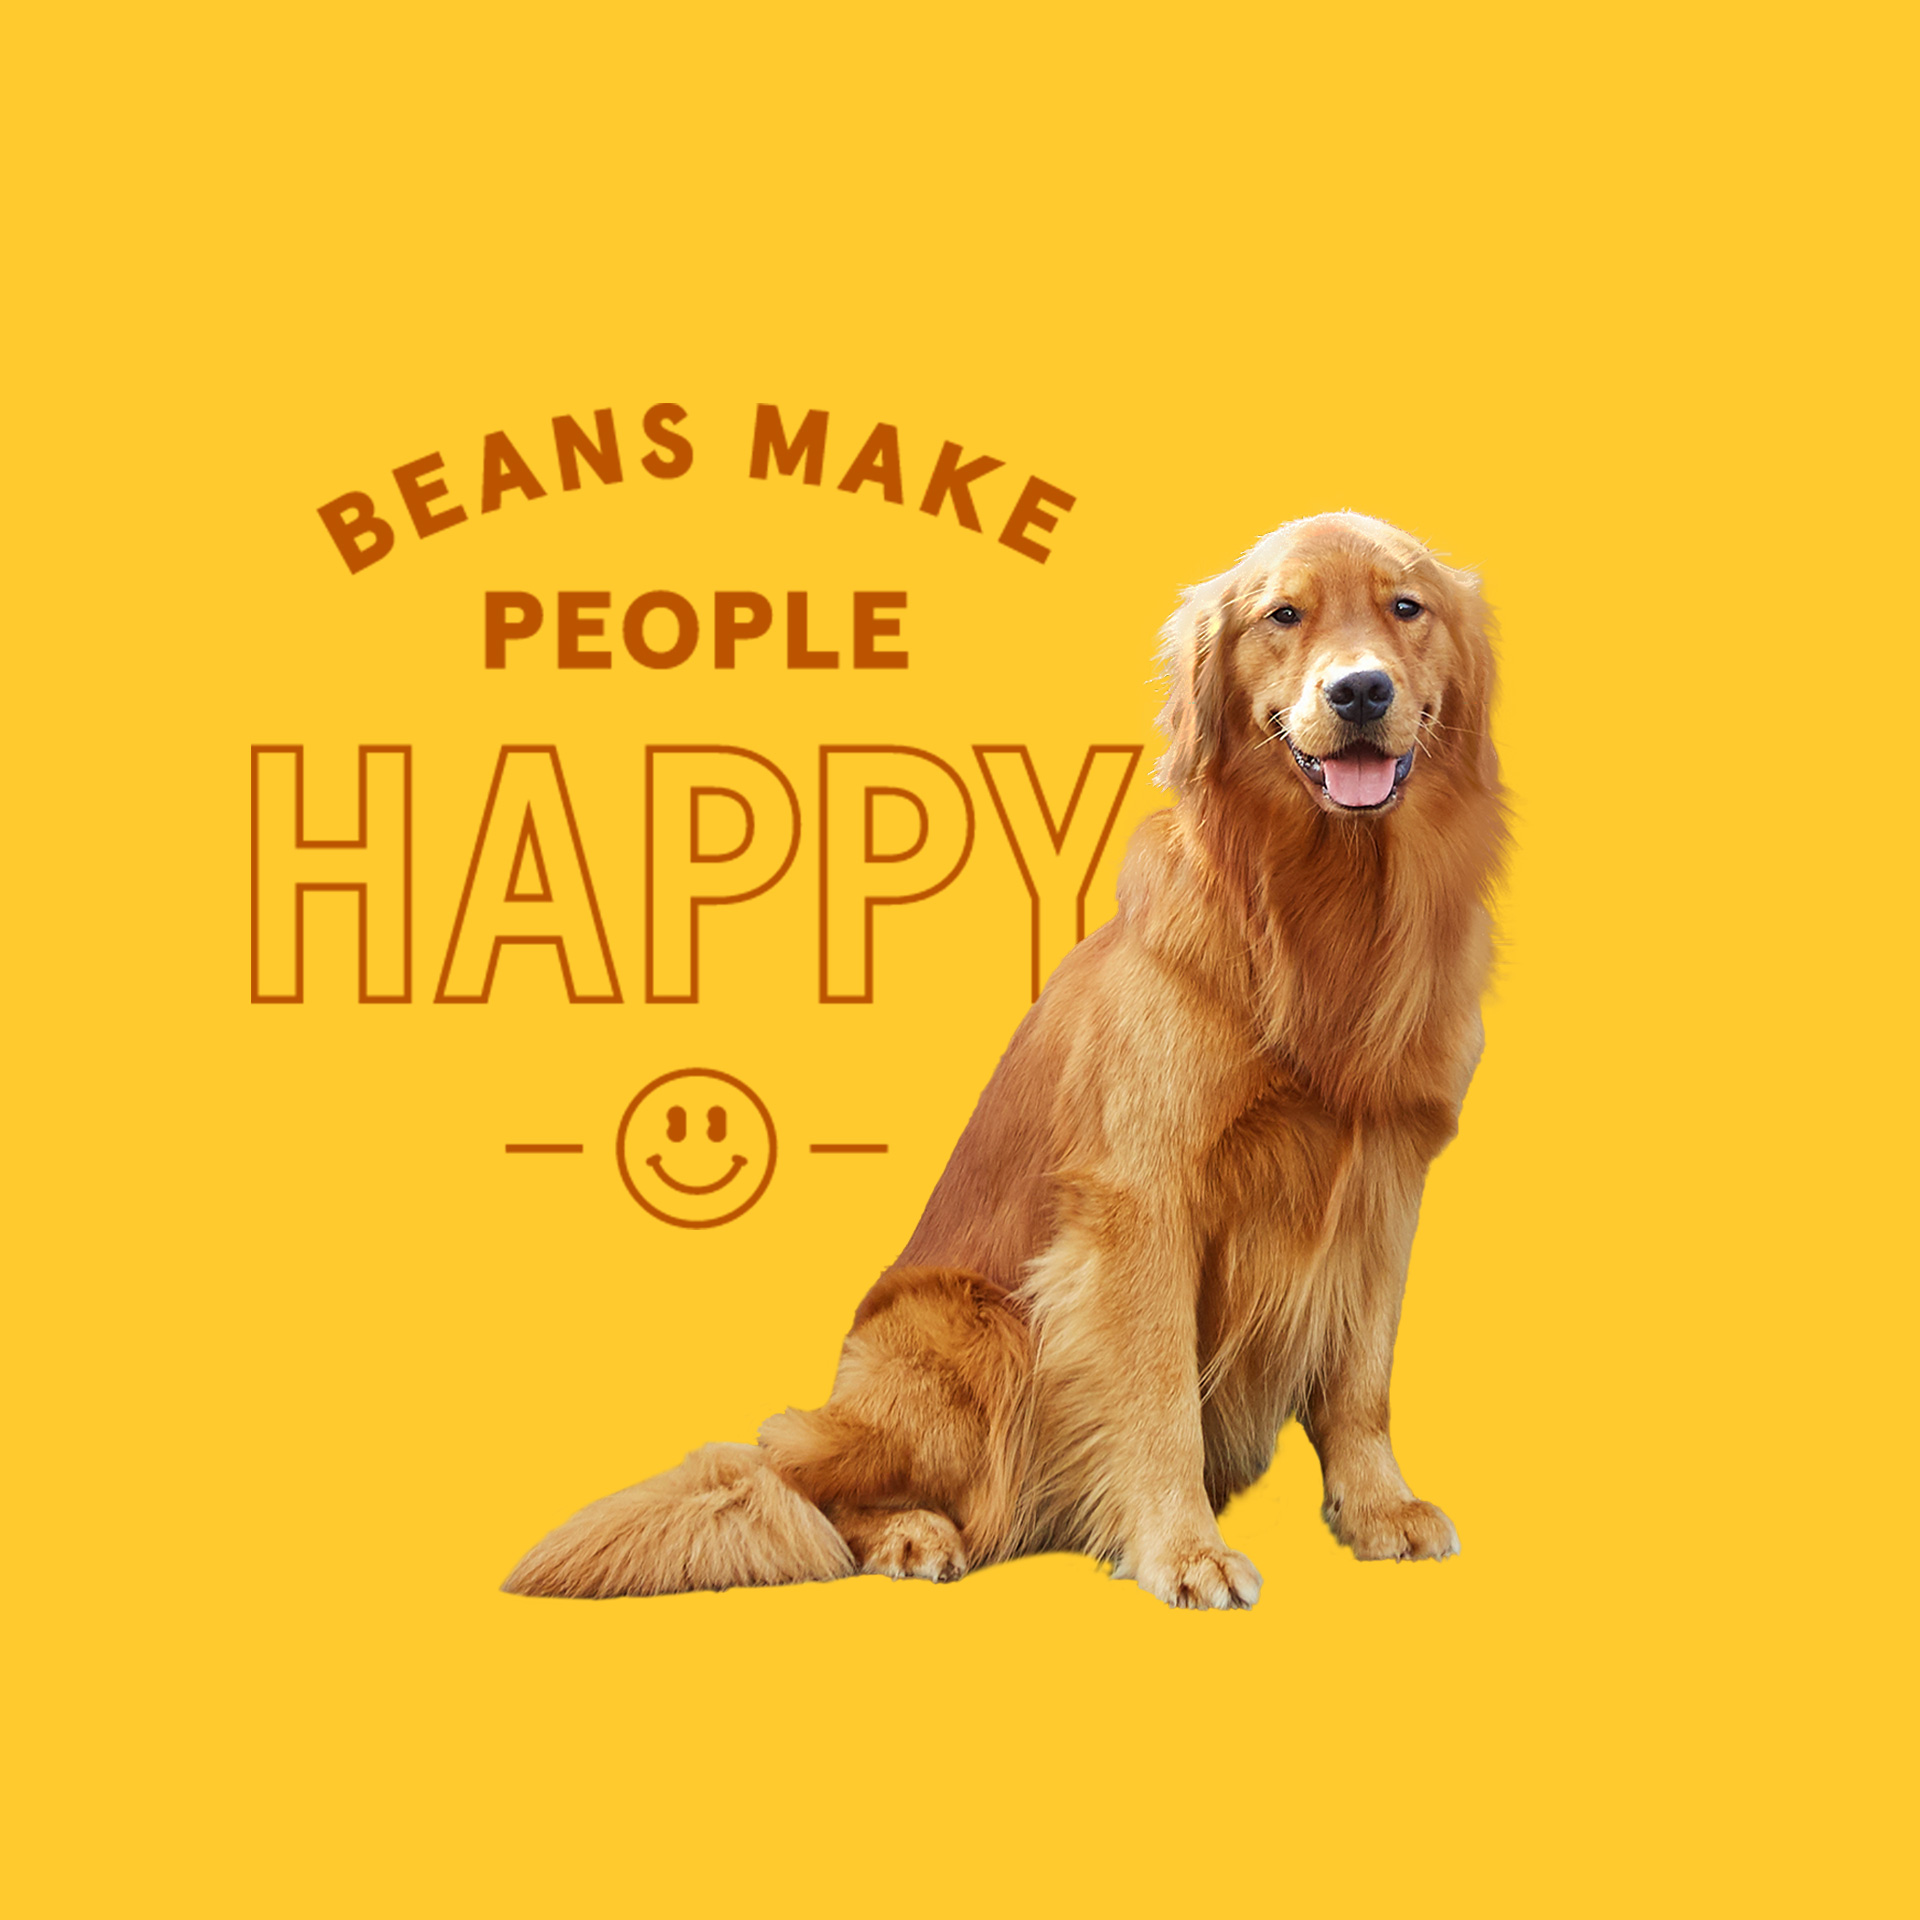 A picture of a tan dog next to the words Beans Make People Happy with a smiley face below